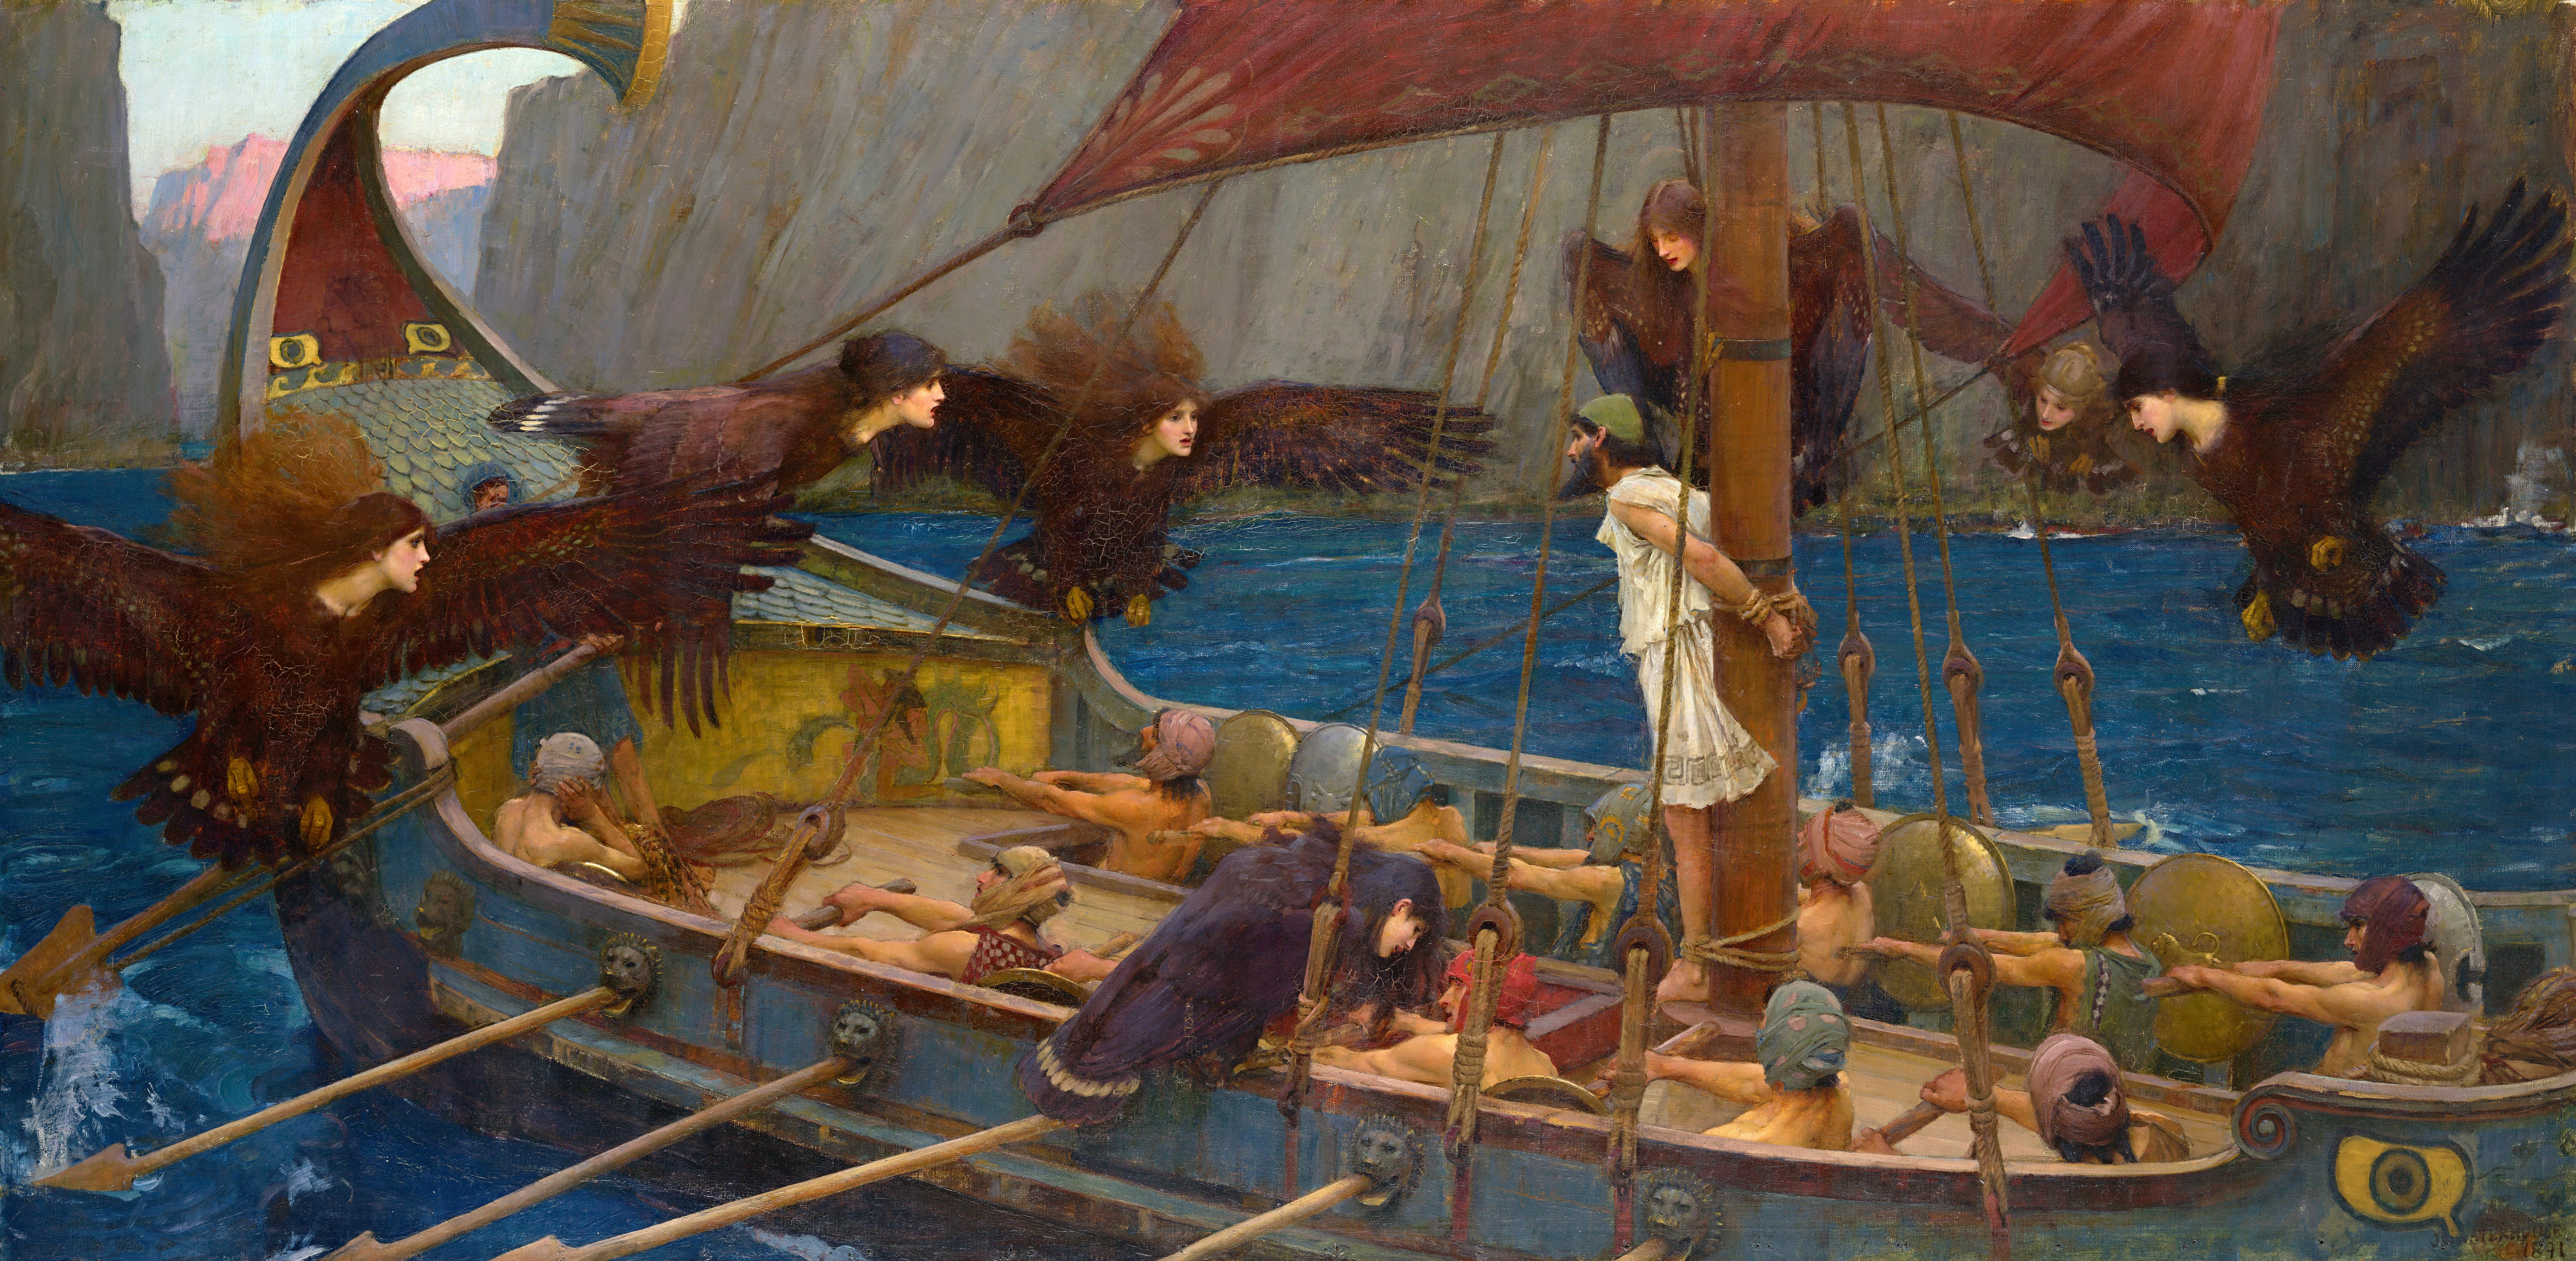 An image of 'Ulysses and the Sirens' (1891) by John William Waterhouse [Public domain].